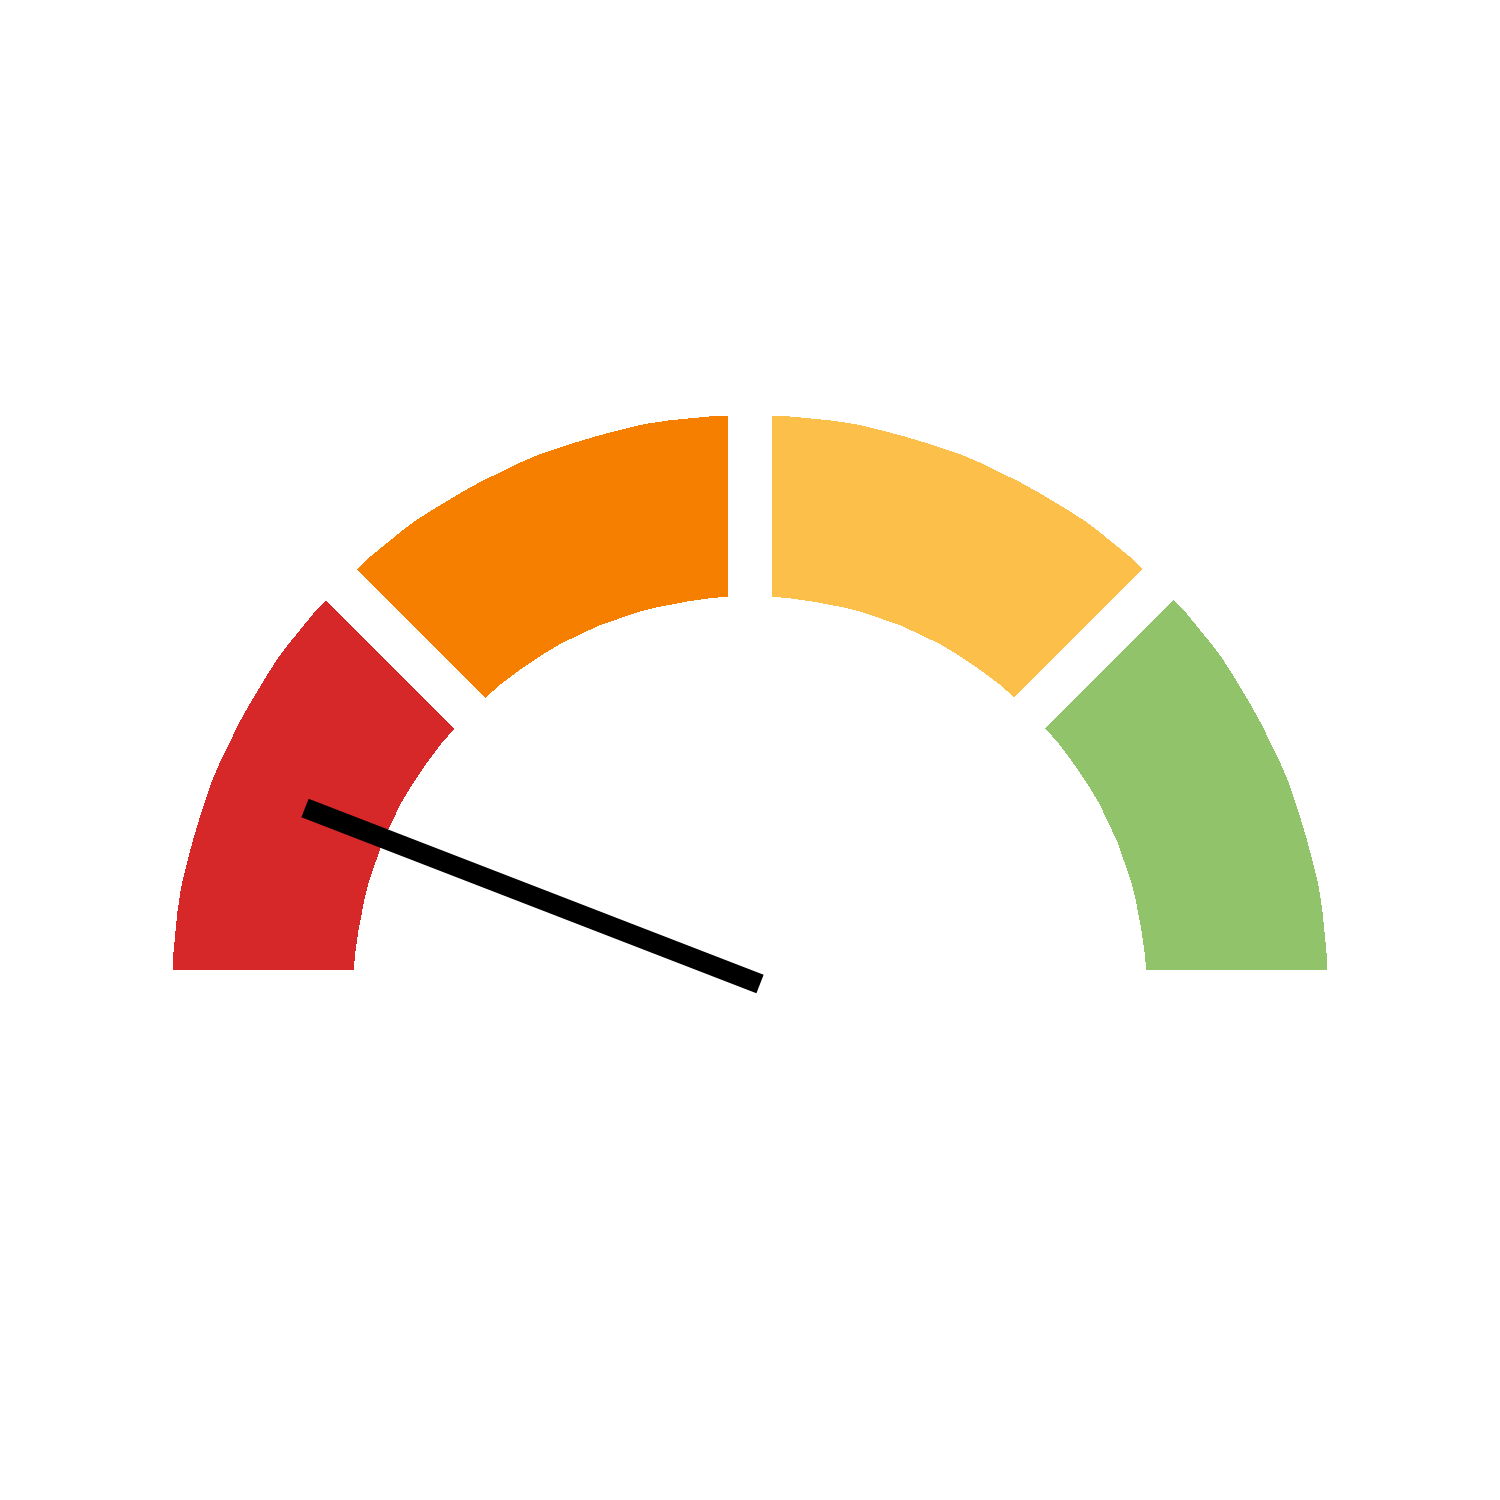 Guage icon with four equally sized colour segments (from left to right): red, orange, yellow, green. A black needle points at the middle of the red segment.